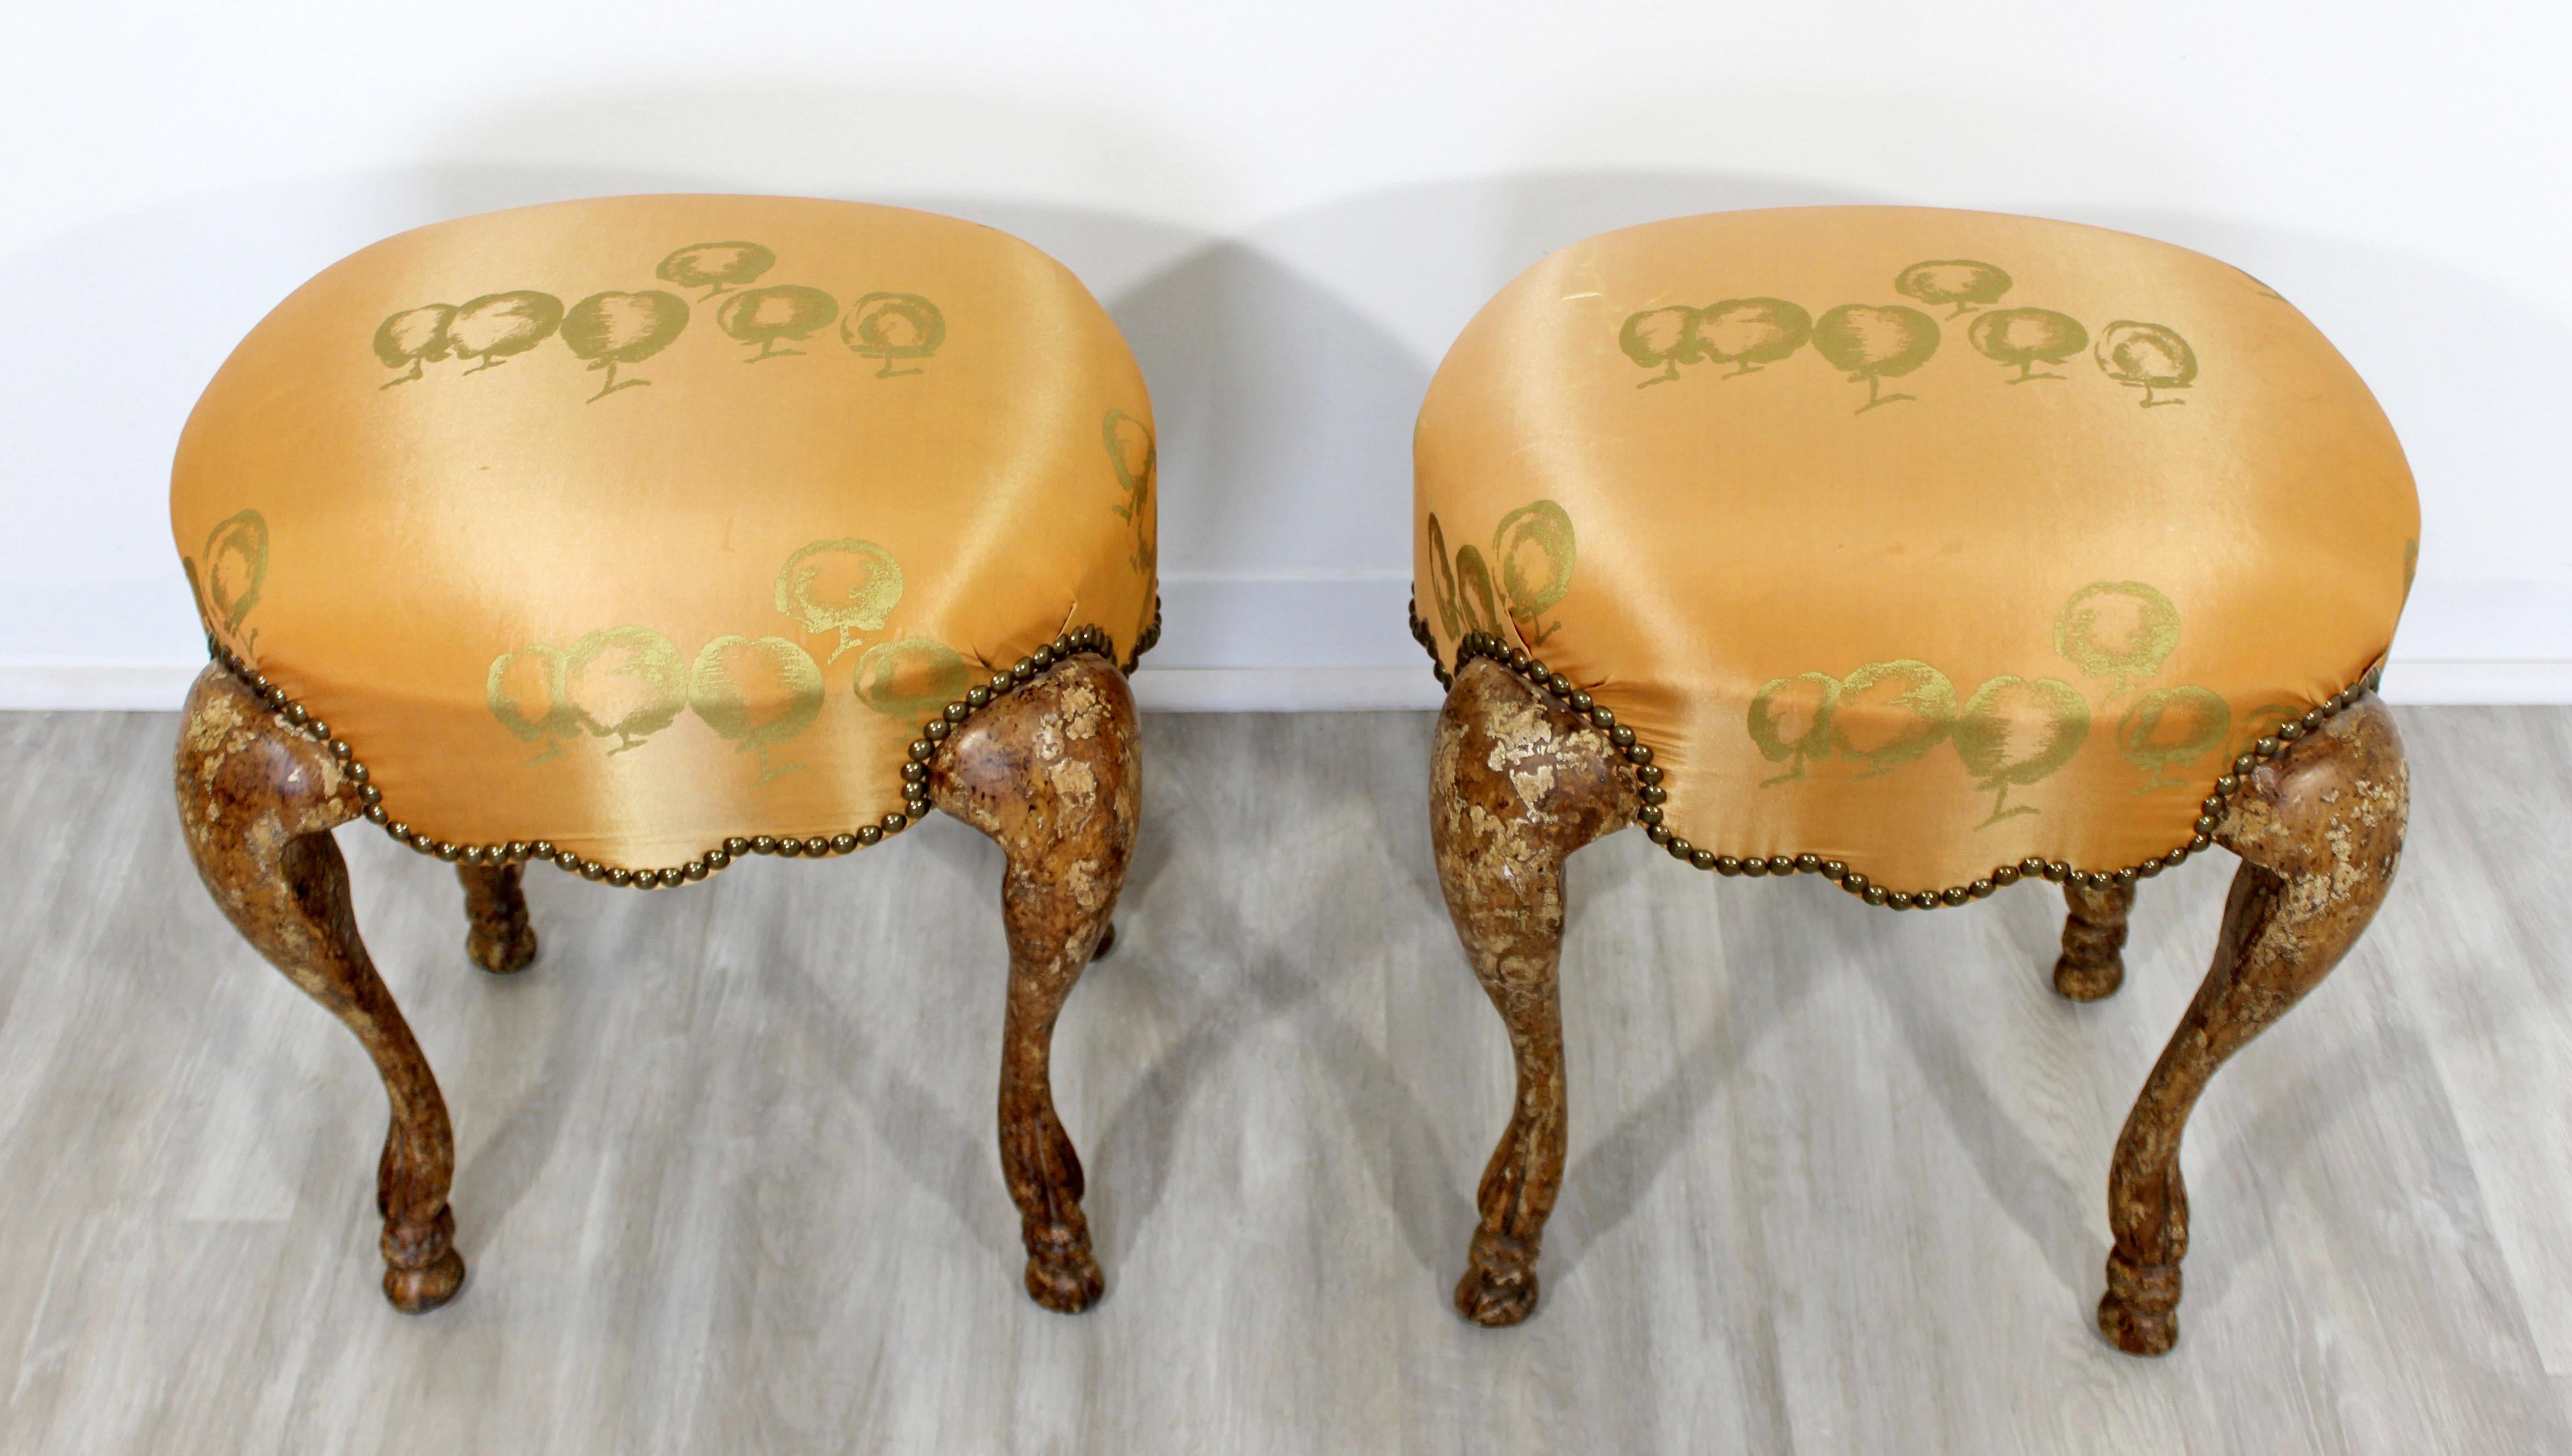 For your consideration is a pretty pair of benches, stools or ottomans, in the Art Deco style, by Minton-Spidell. In very good condition. The dimensions of each are 16